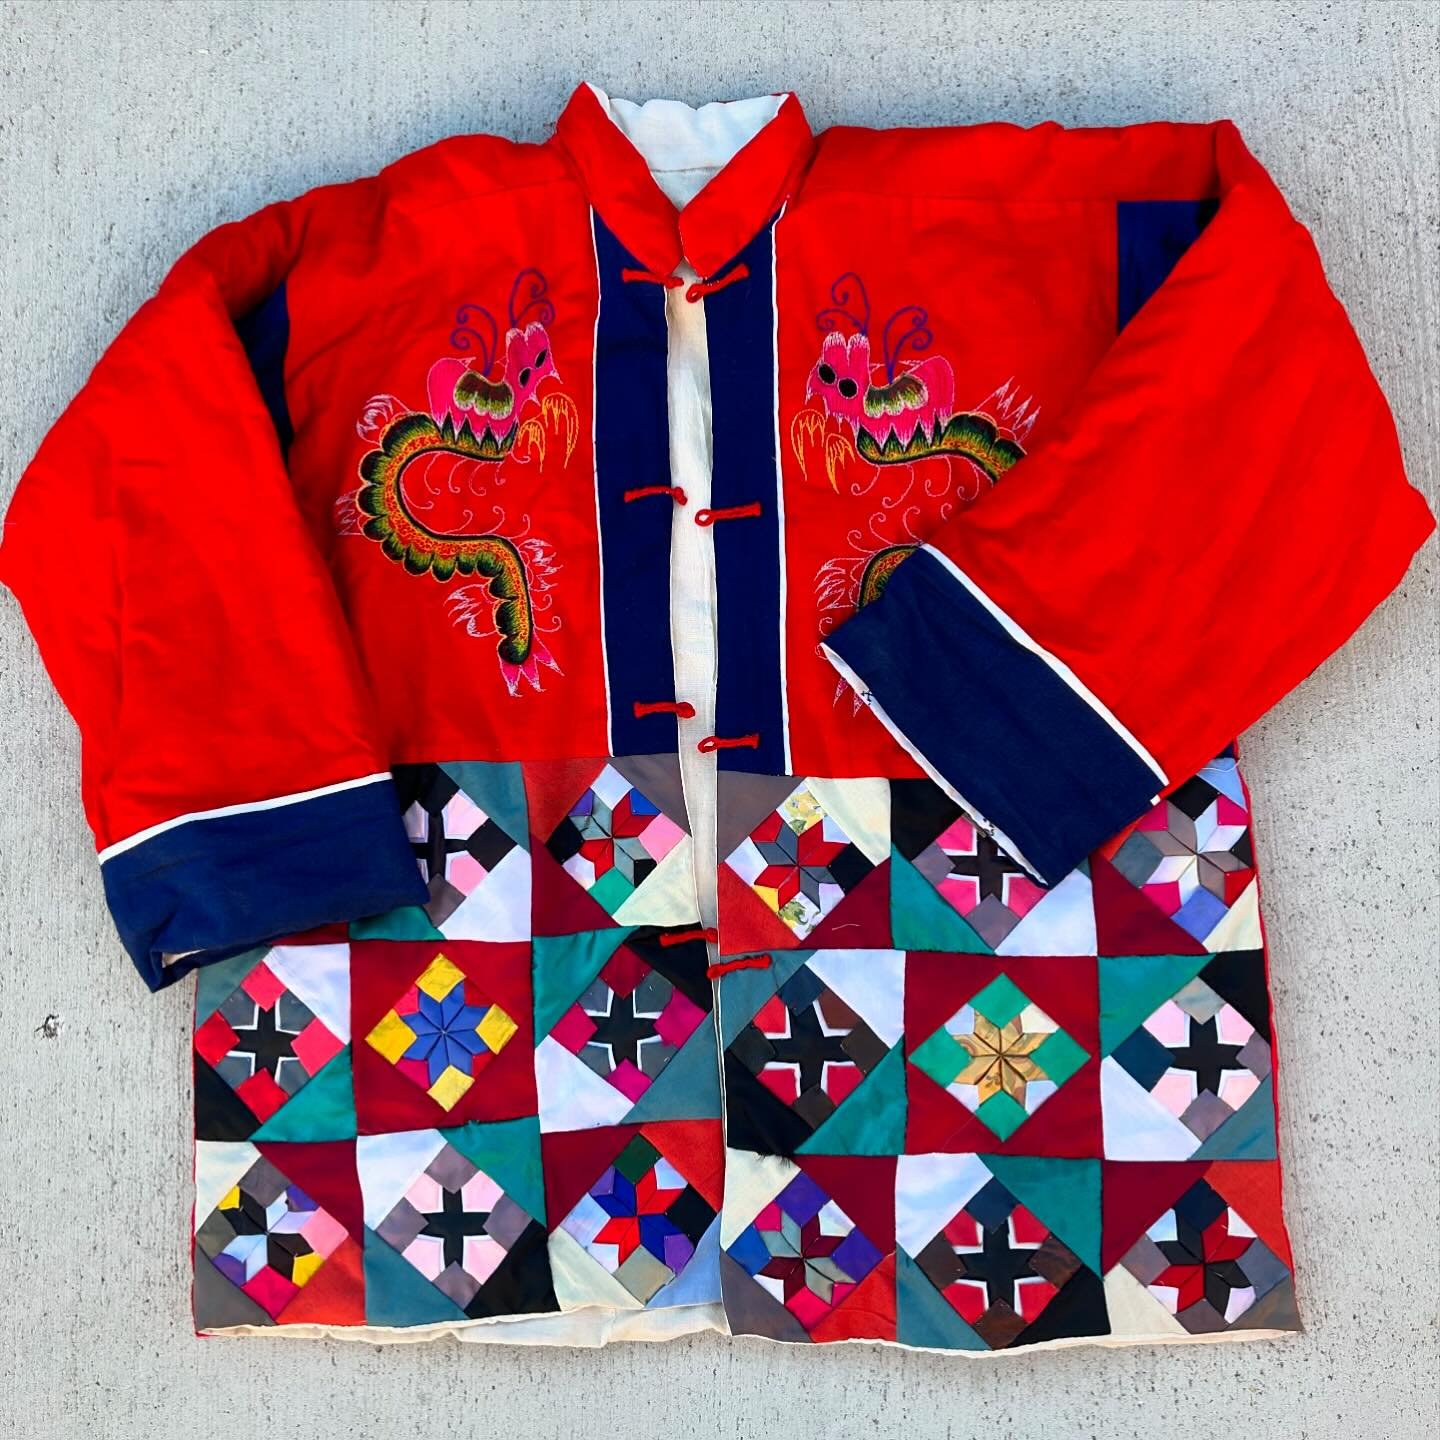 Pretty groovy souvenir jacket. I beleive it to be Chinese or Taiwanese dating from around the 1960s, if you have seen one before let me know. A lot of embroidery work and quilting with various fabrics throughout. Some of the applied pieces on the bac